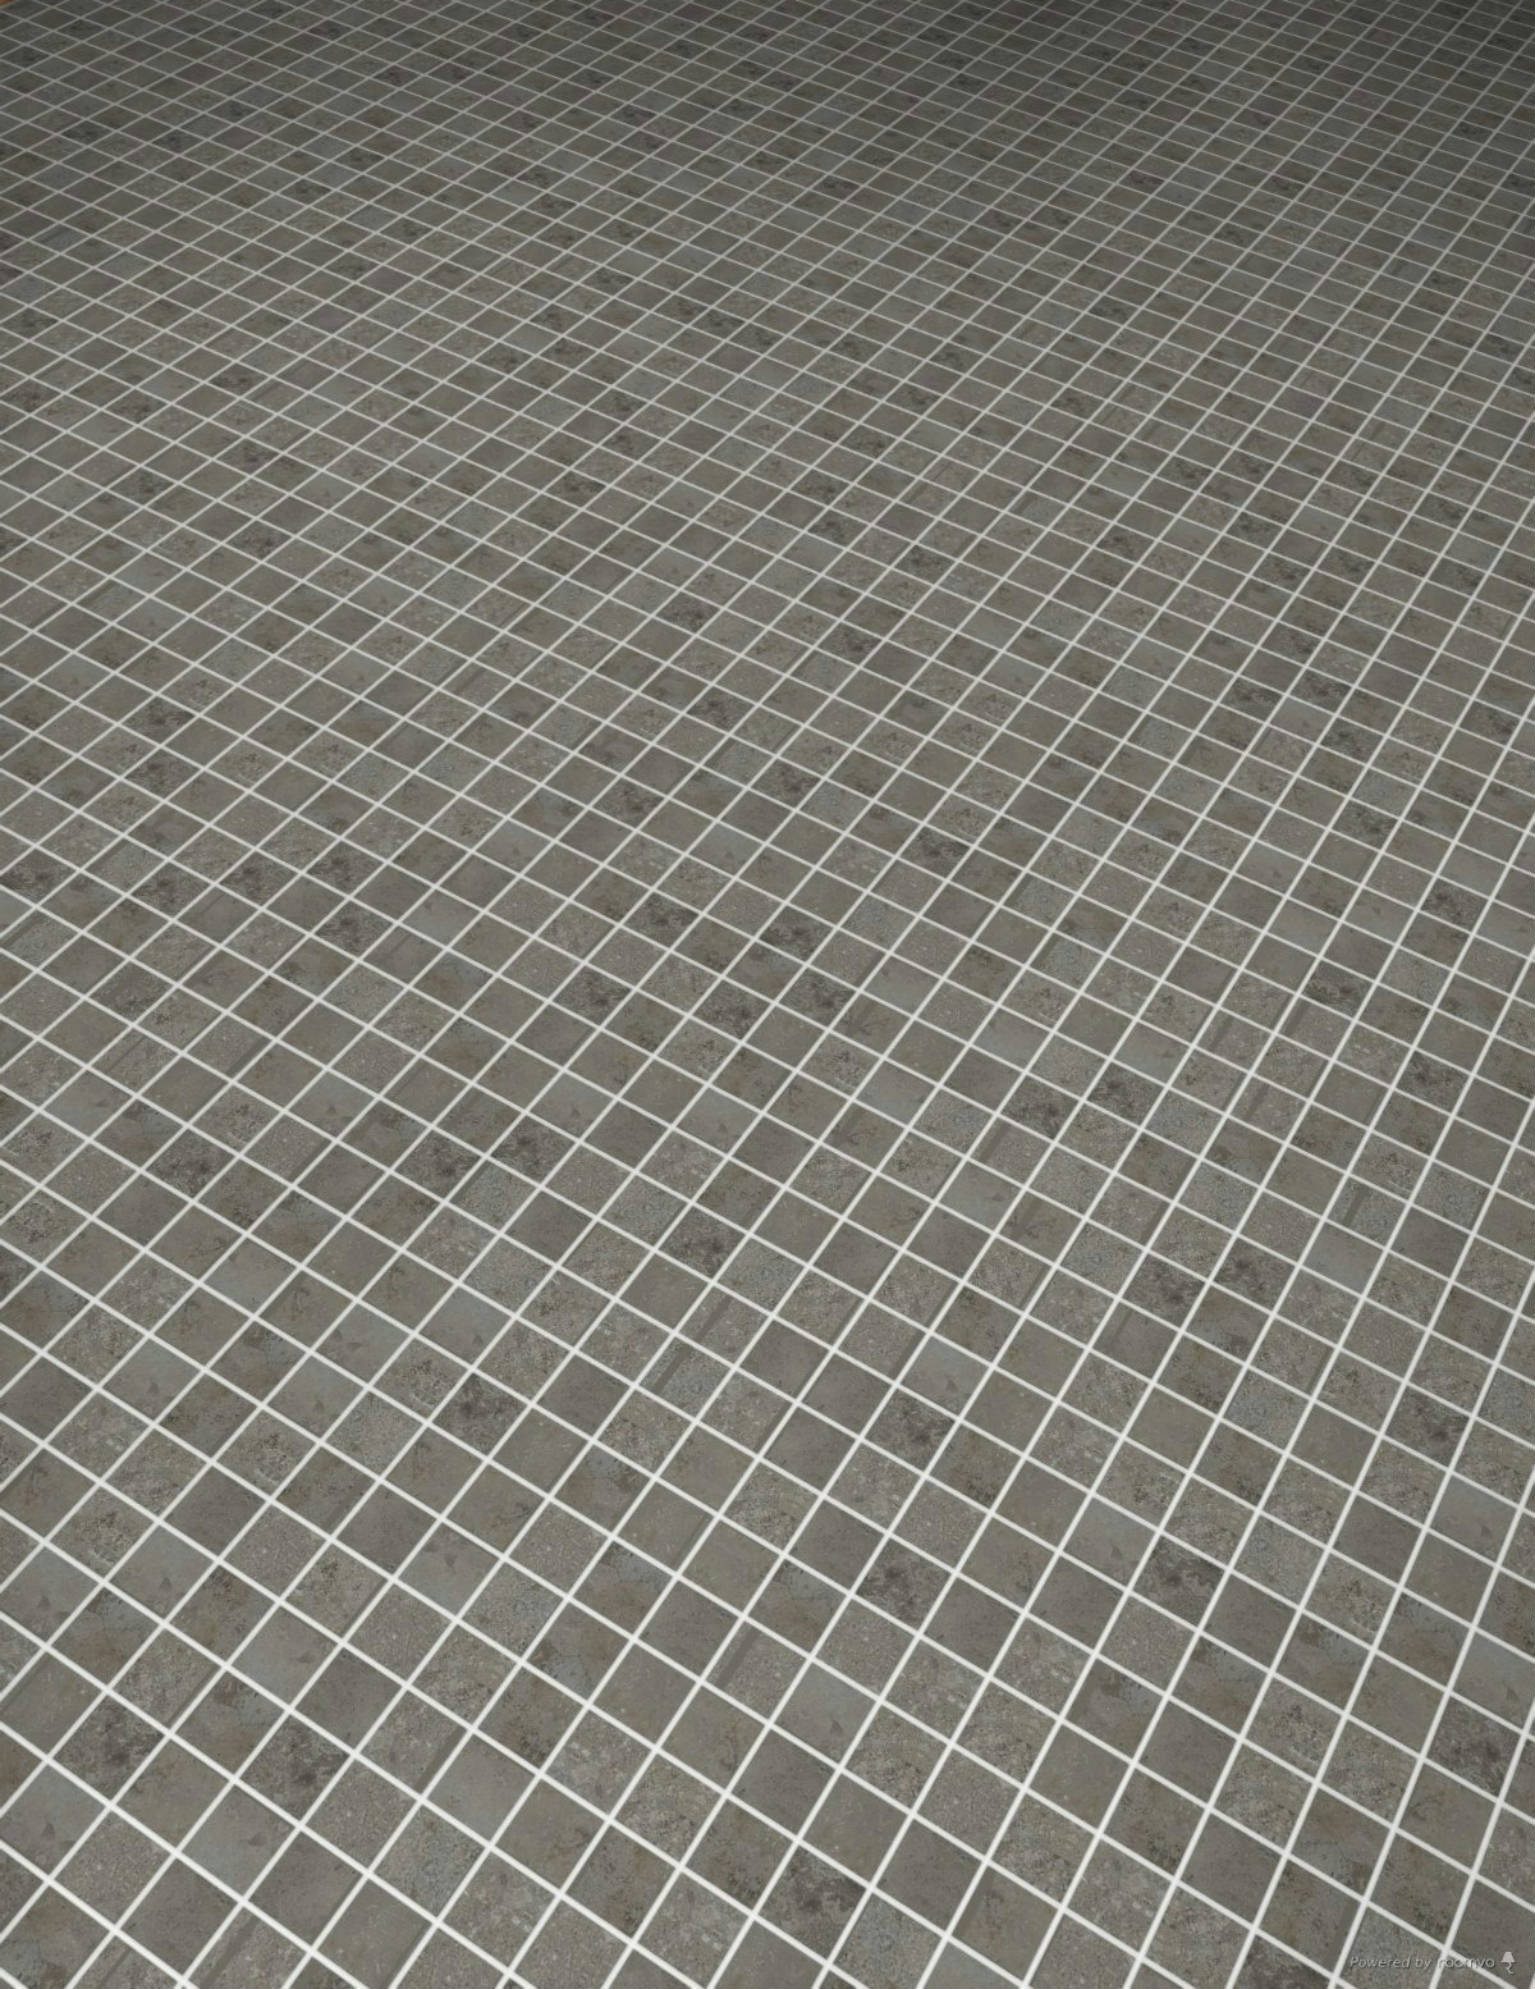 Elevation Menfi Grey 2X2 Mosaic | Qualis Ceramica | Luxury Tile and Vinyl at affordable prices